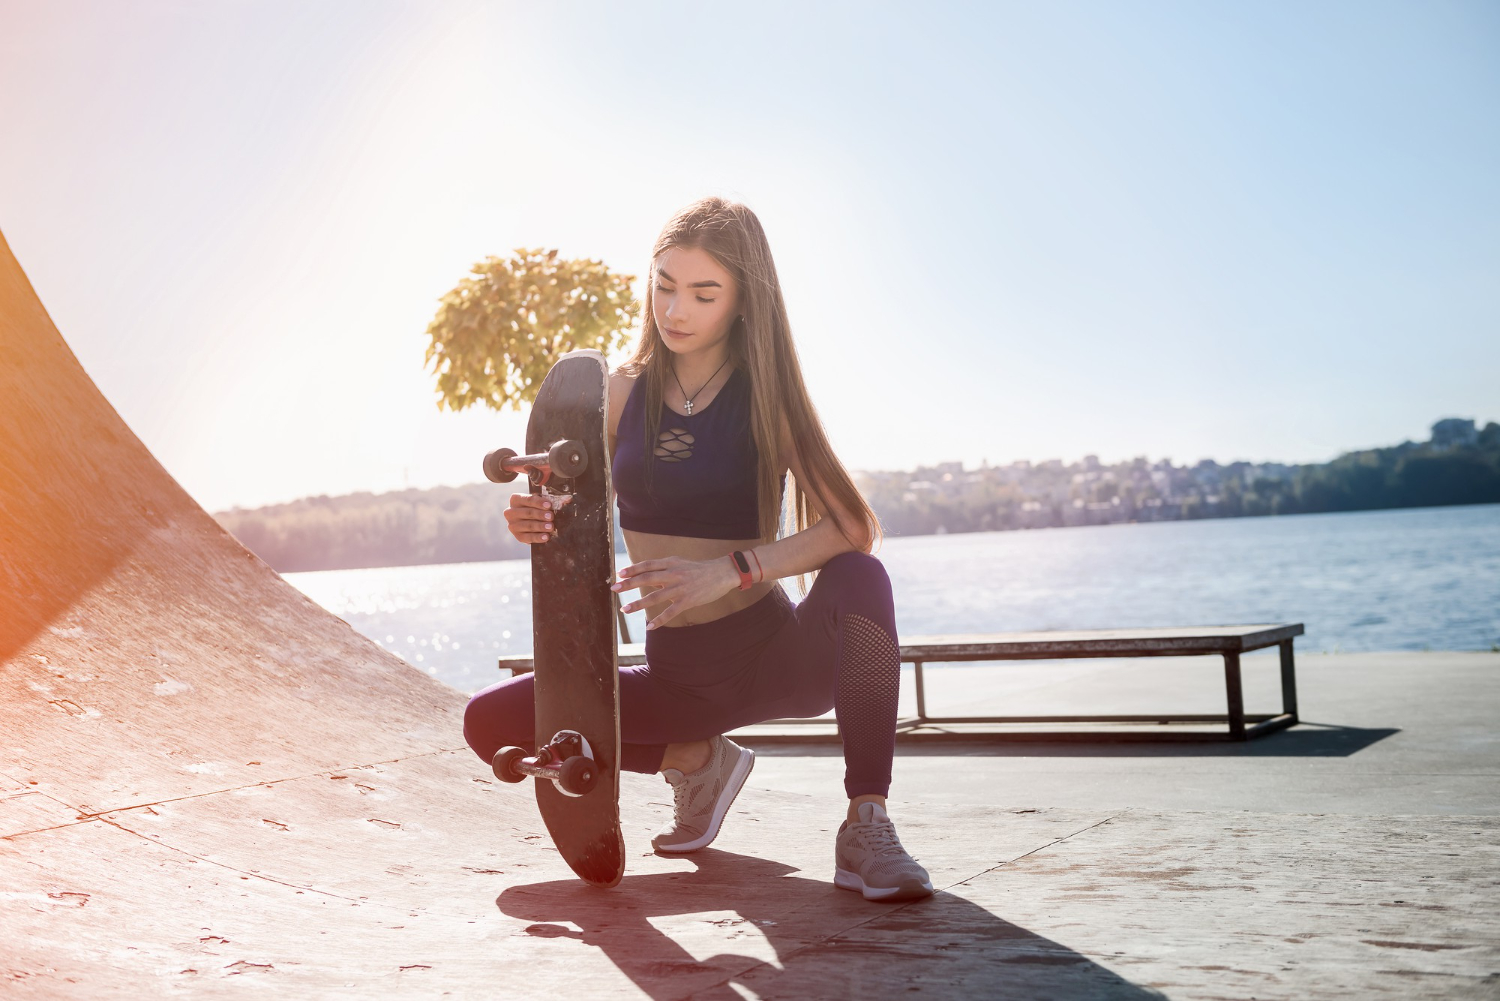 teenager girl ride her skateboard healthy lifestyle